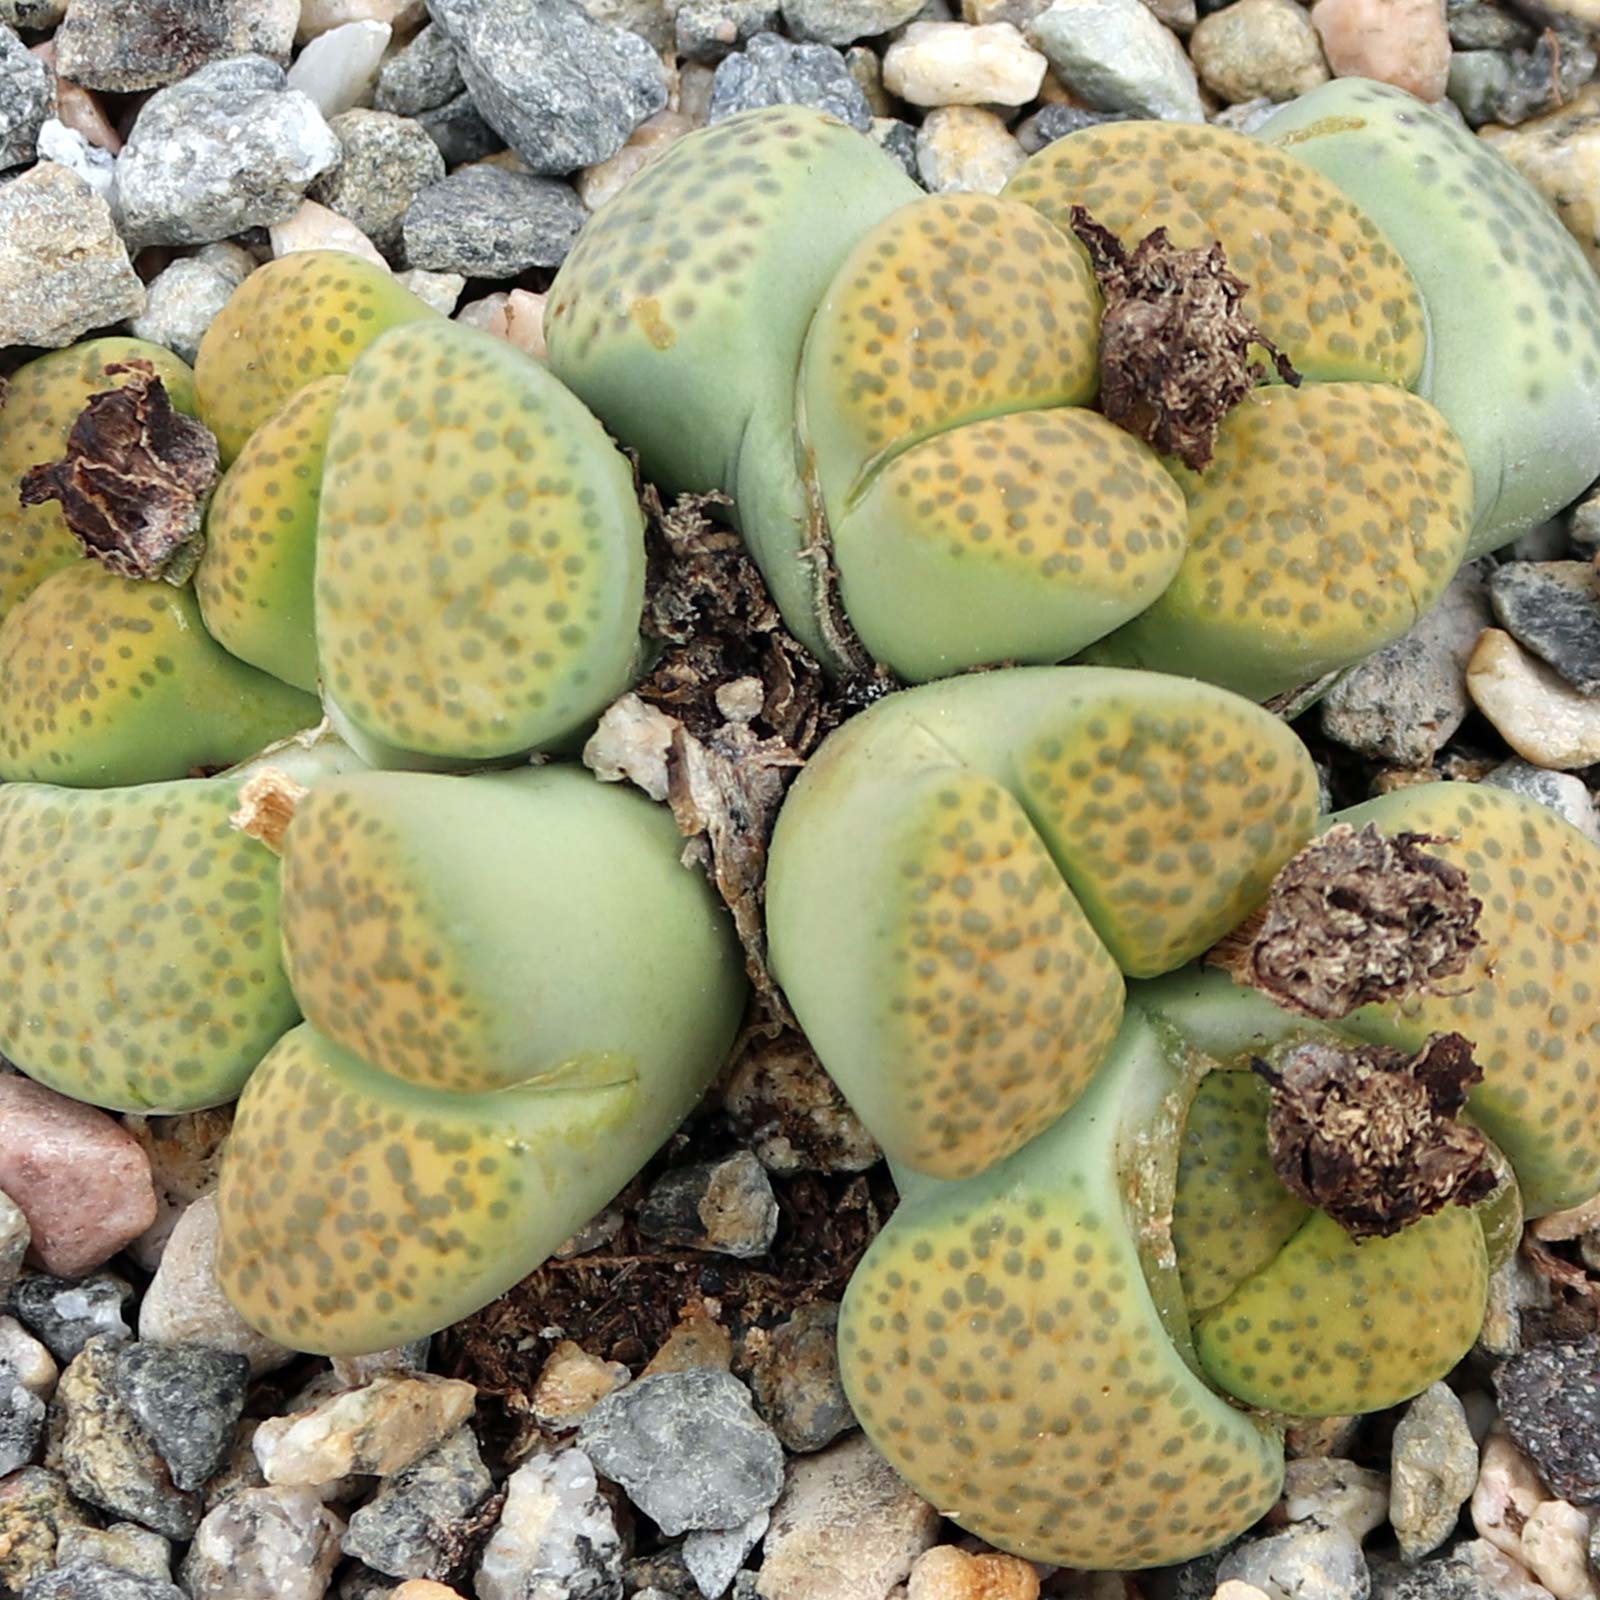 How is Lithops fulviceps 'Aurea' different from regular Lithops?